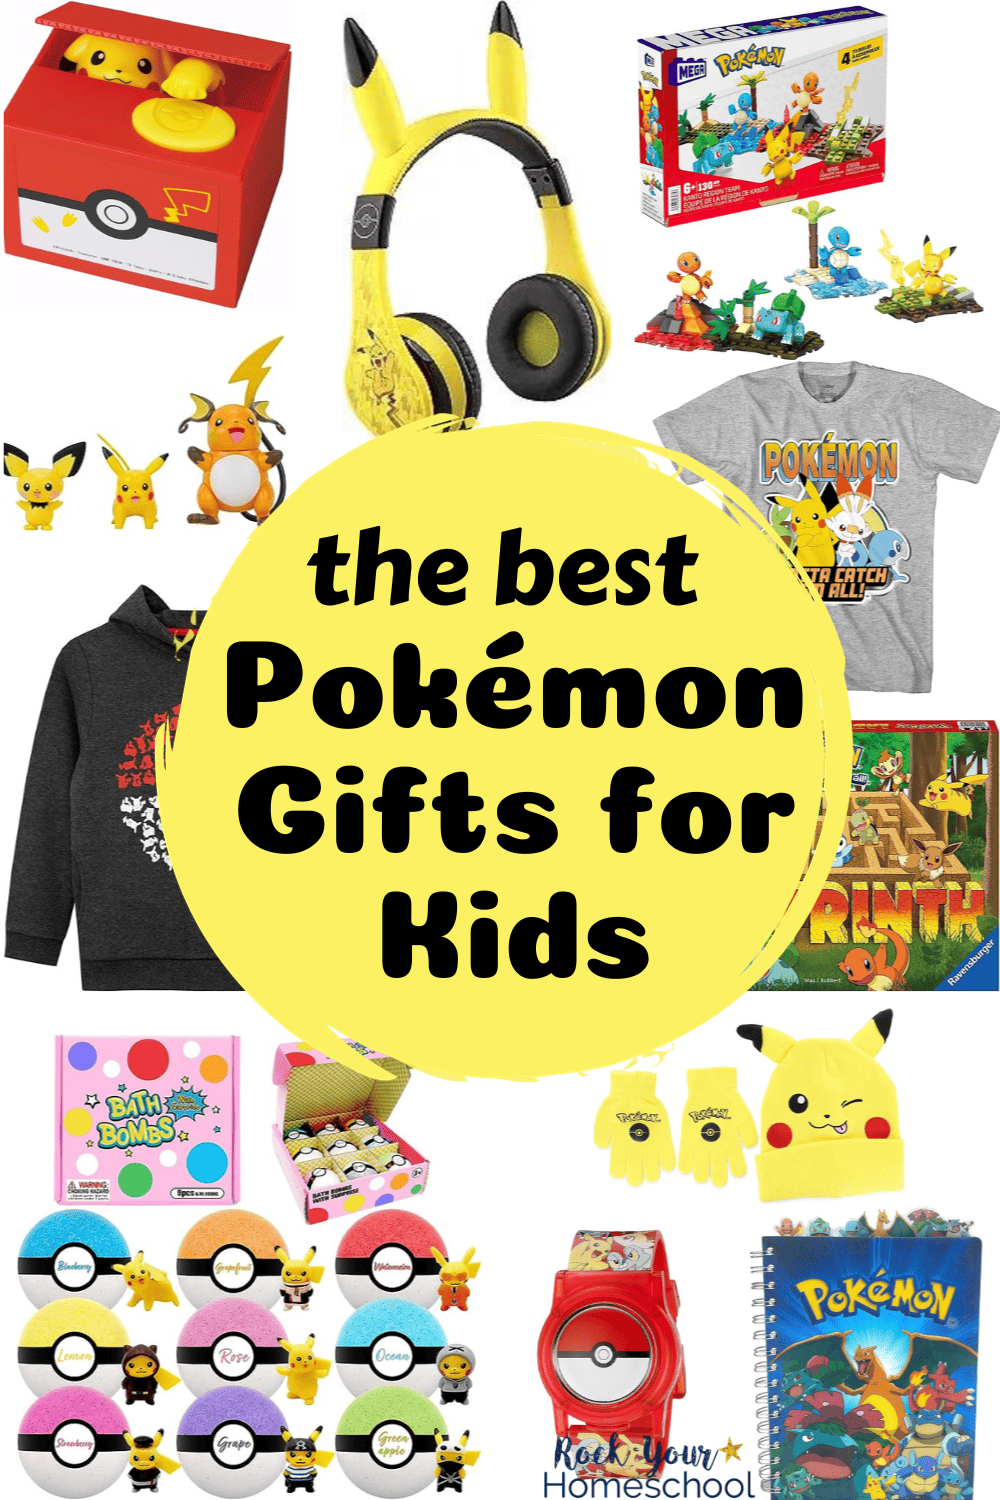 Variety of Pokémon gifts including headphones, games, toys, and clothes.